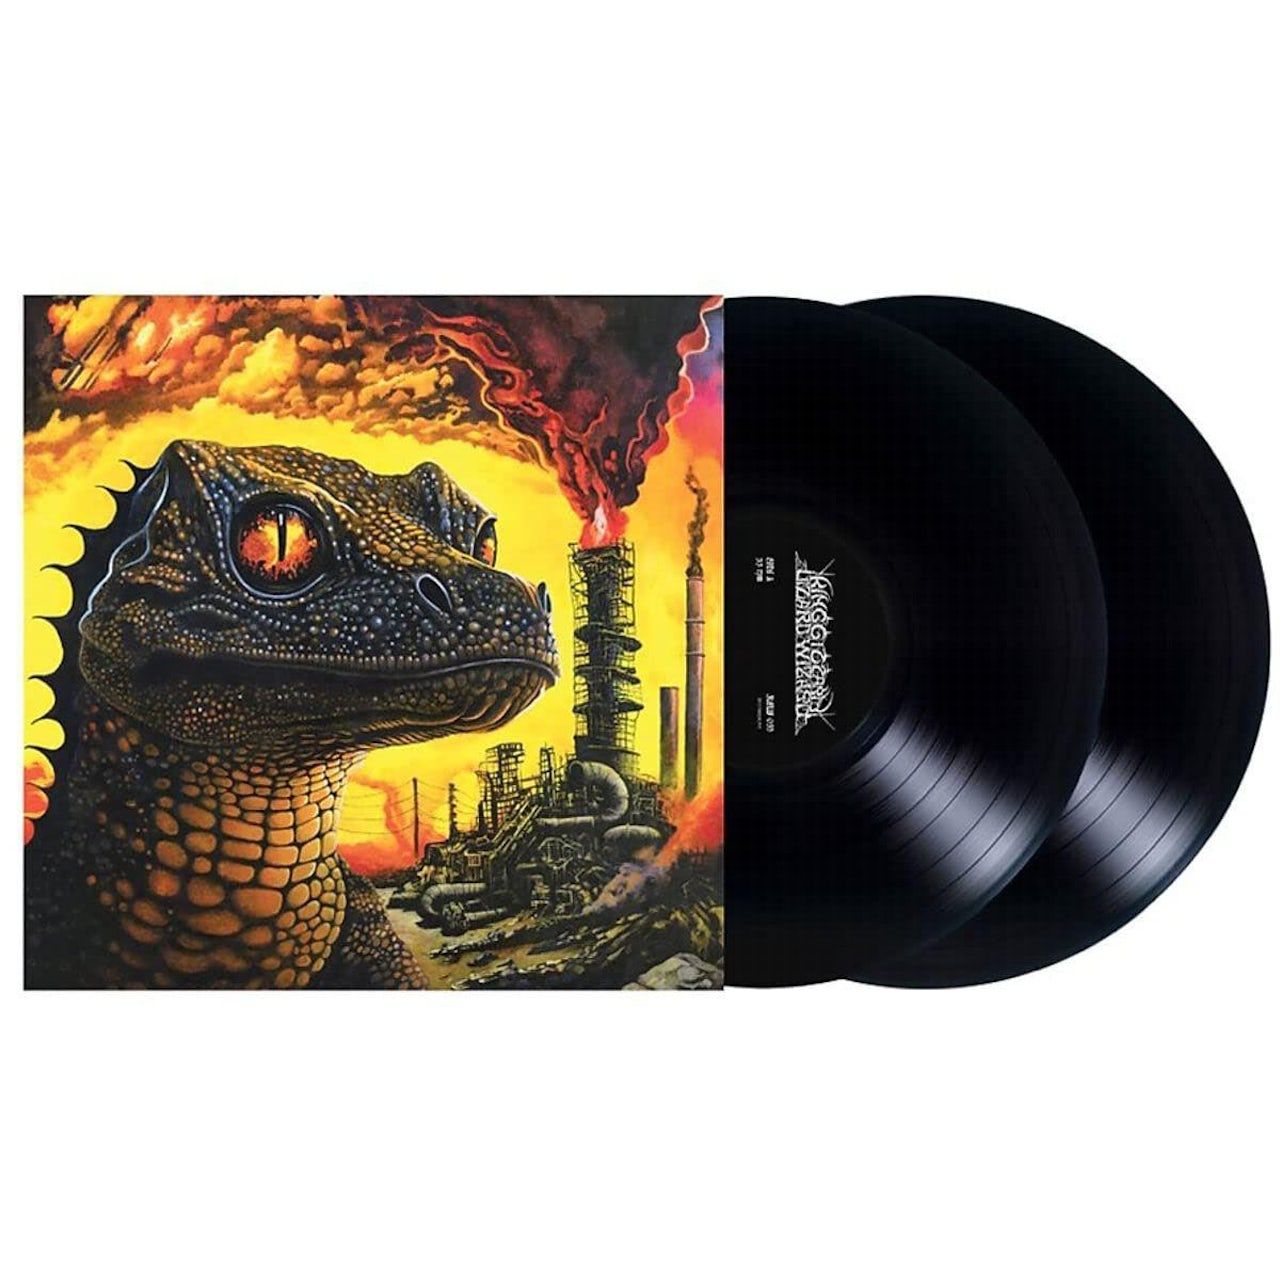 0842812189524, Виниловая пластинка King Gizzard & The Lizard Wizard, Petrodragonic Apocalypse; Or, Dawn Of Eternal Night: An Annihilation Of Planet Earth And The Beginning Of Merciless Damnation (coloured) 0842812189524 виниловая пластинка king gizzard